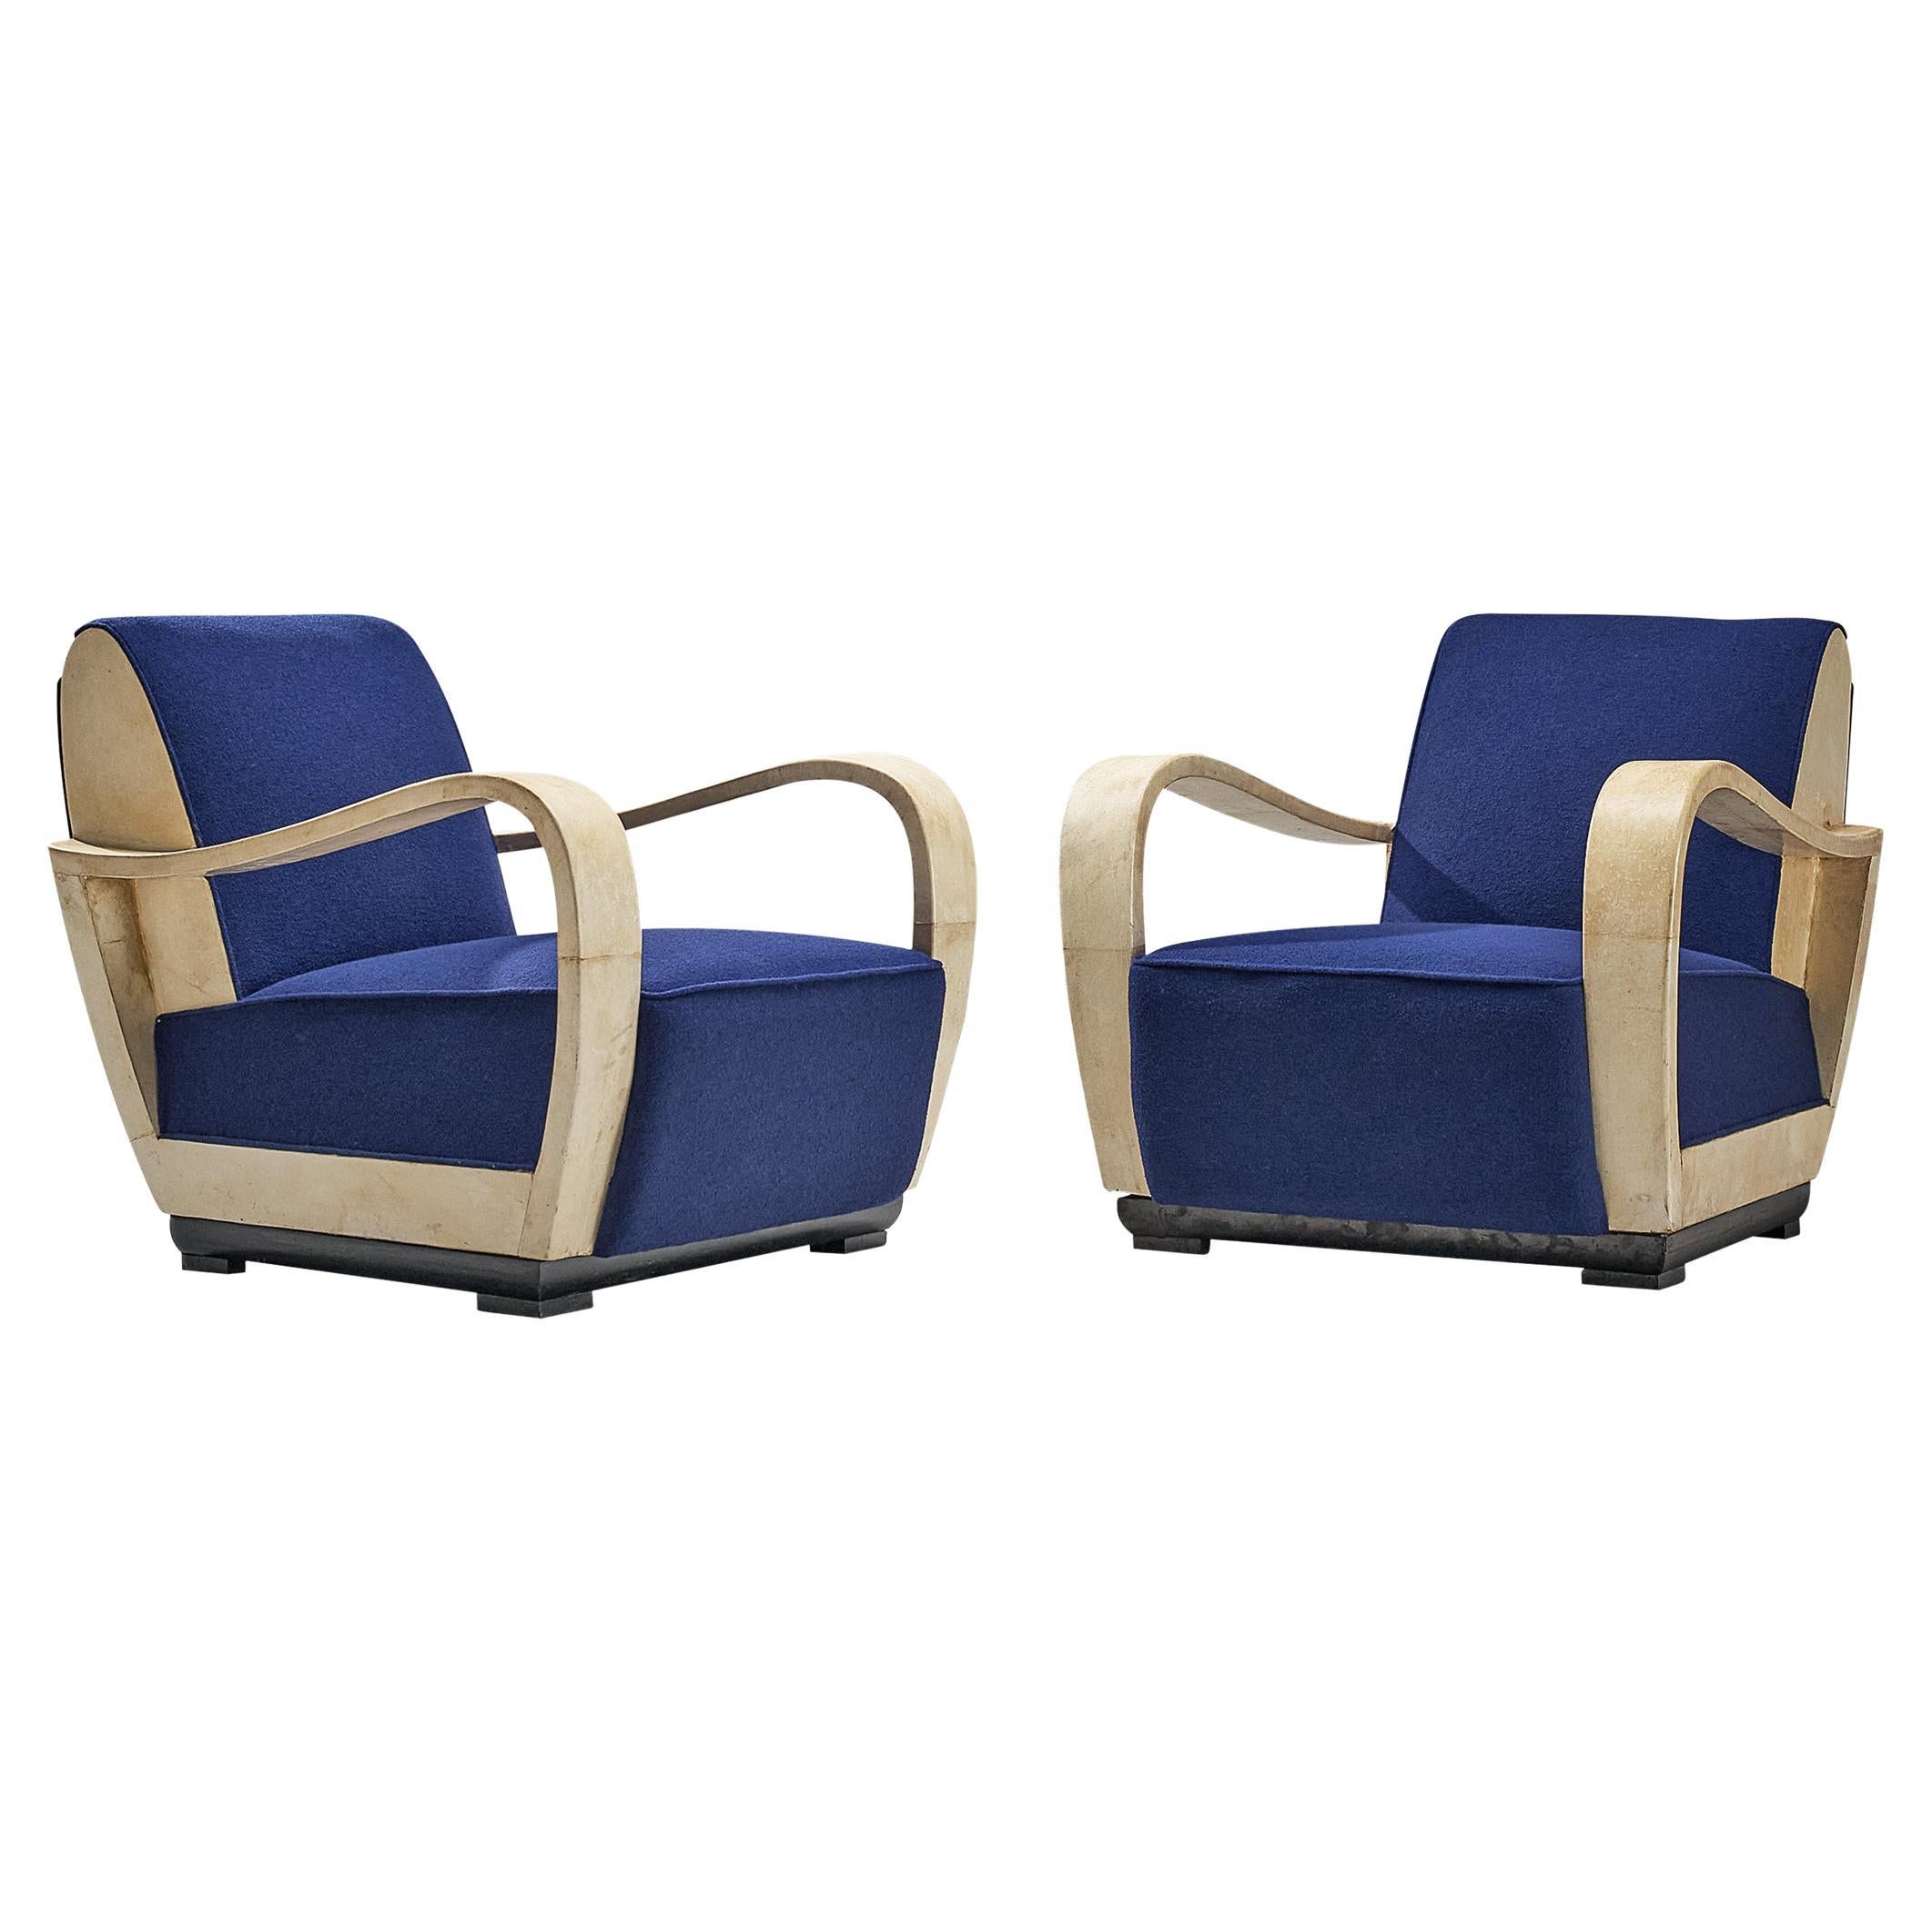 Unique Valzania Pair of Lounge Chairs in Parchment and Blue Upholstery For Sale